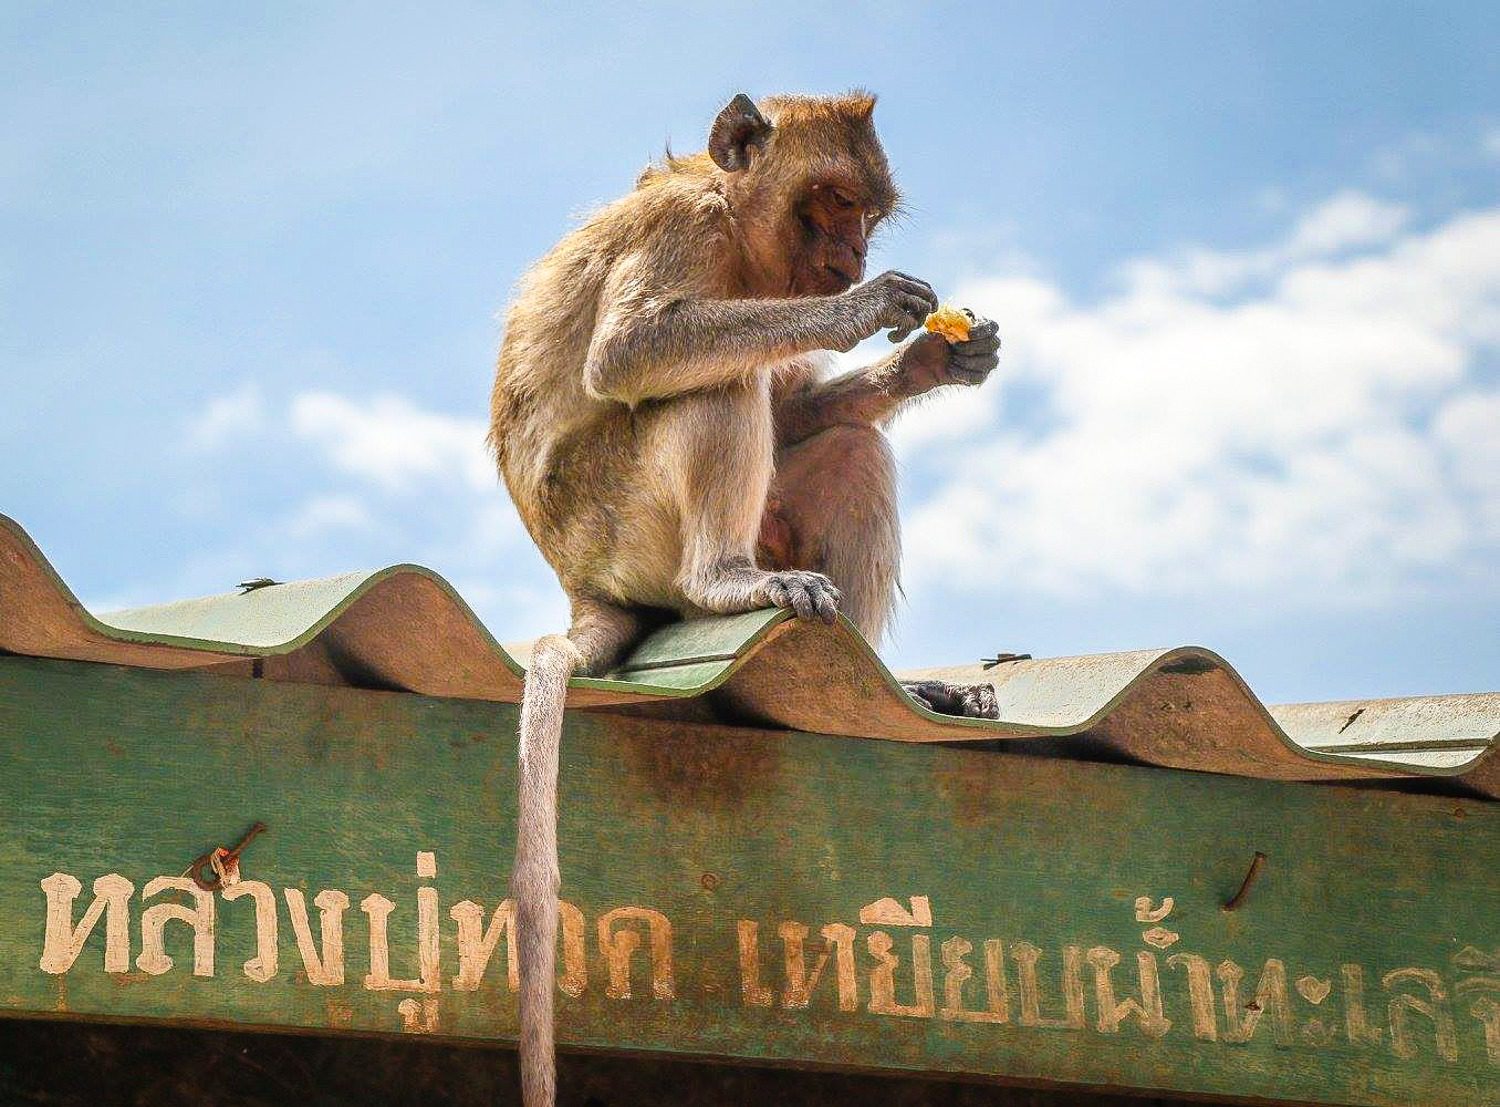 A monkey spotted at Wat Khao Takiap, Thailand.